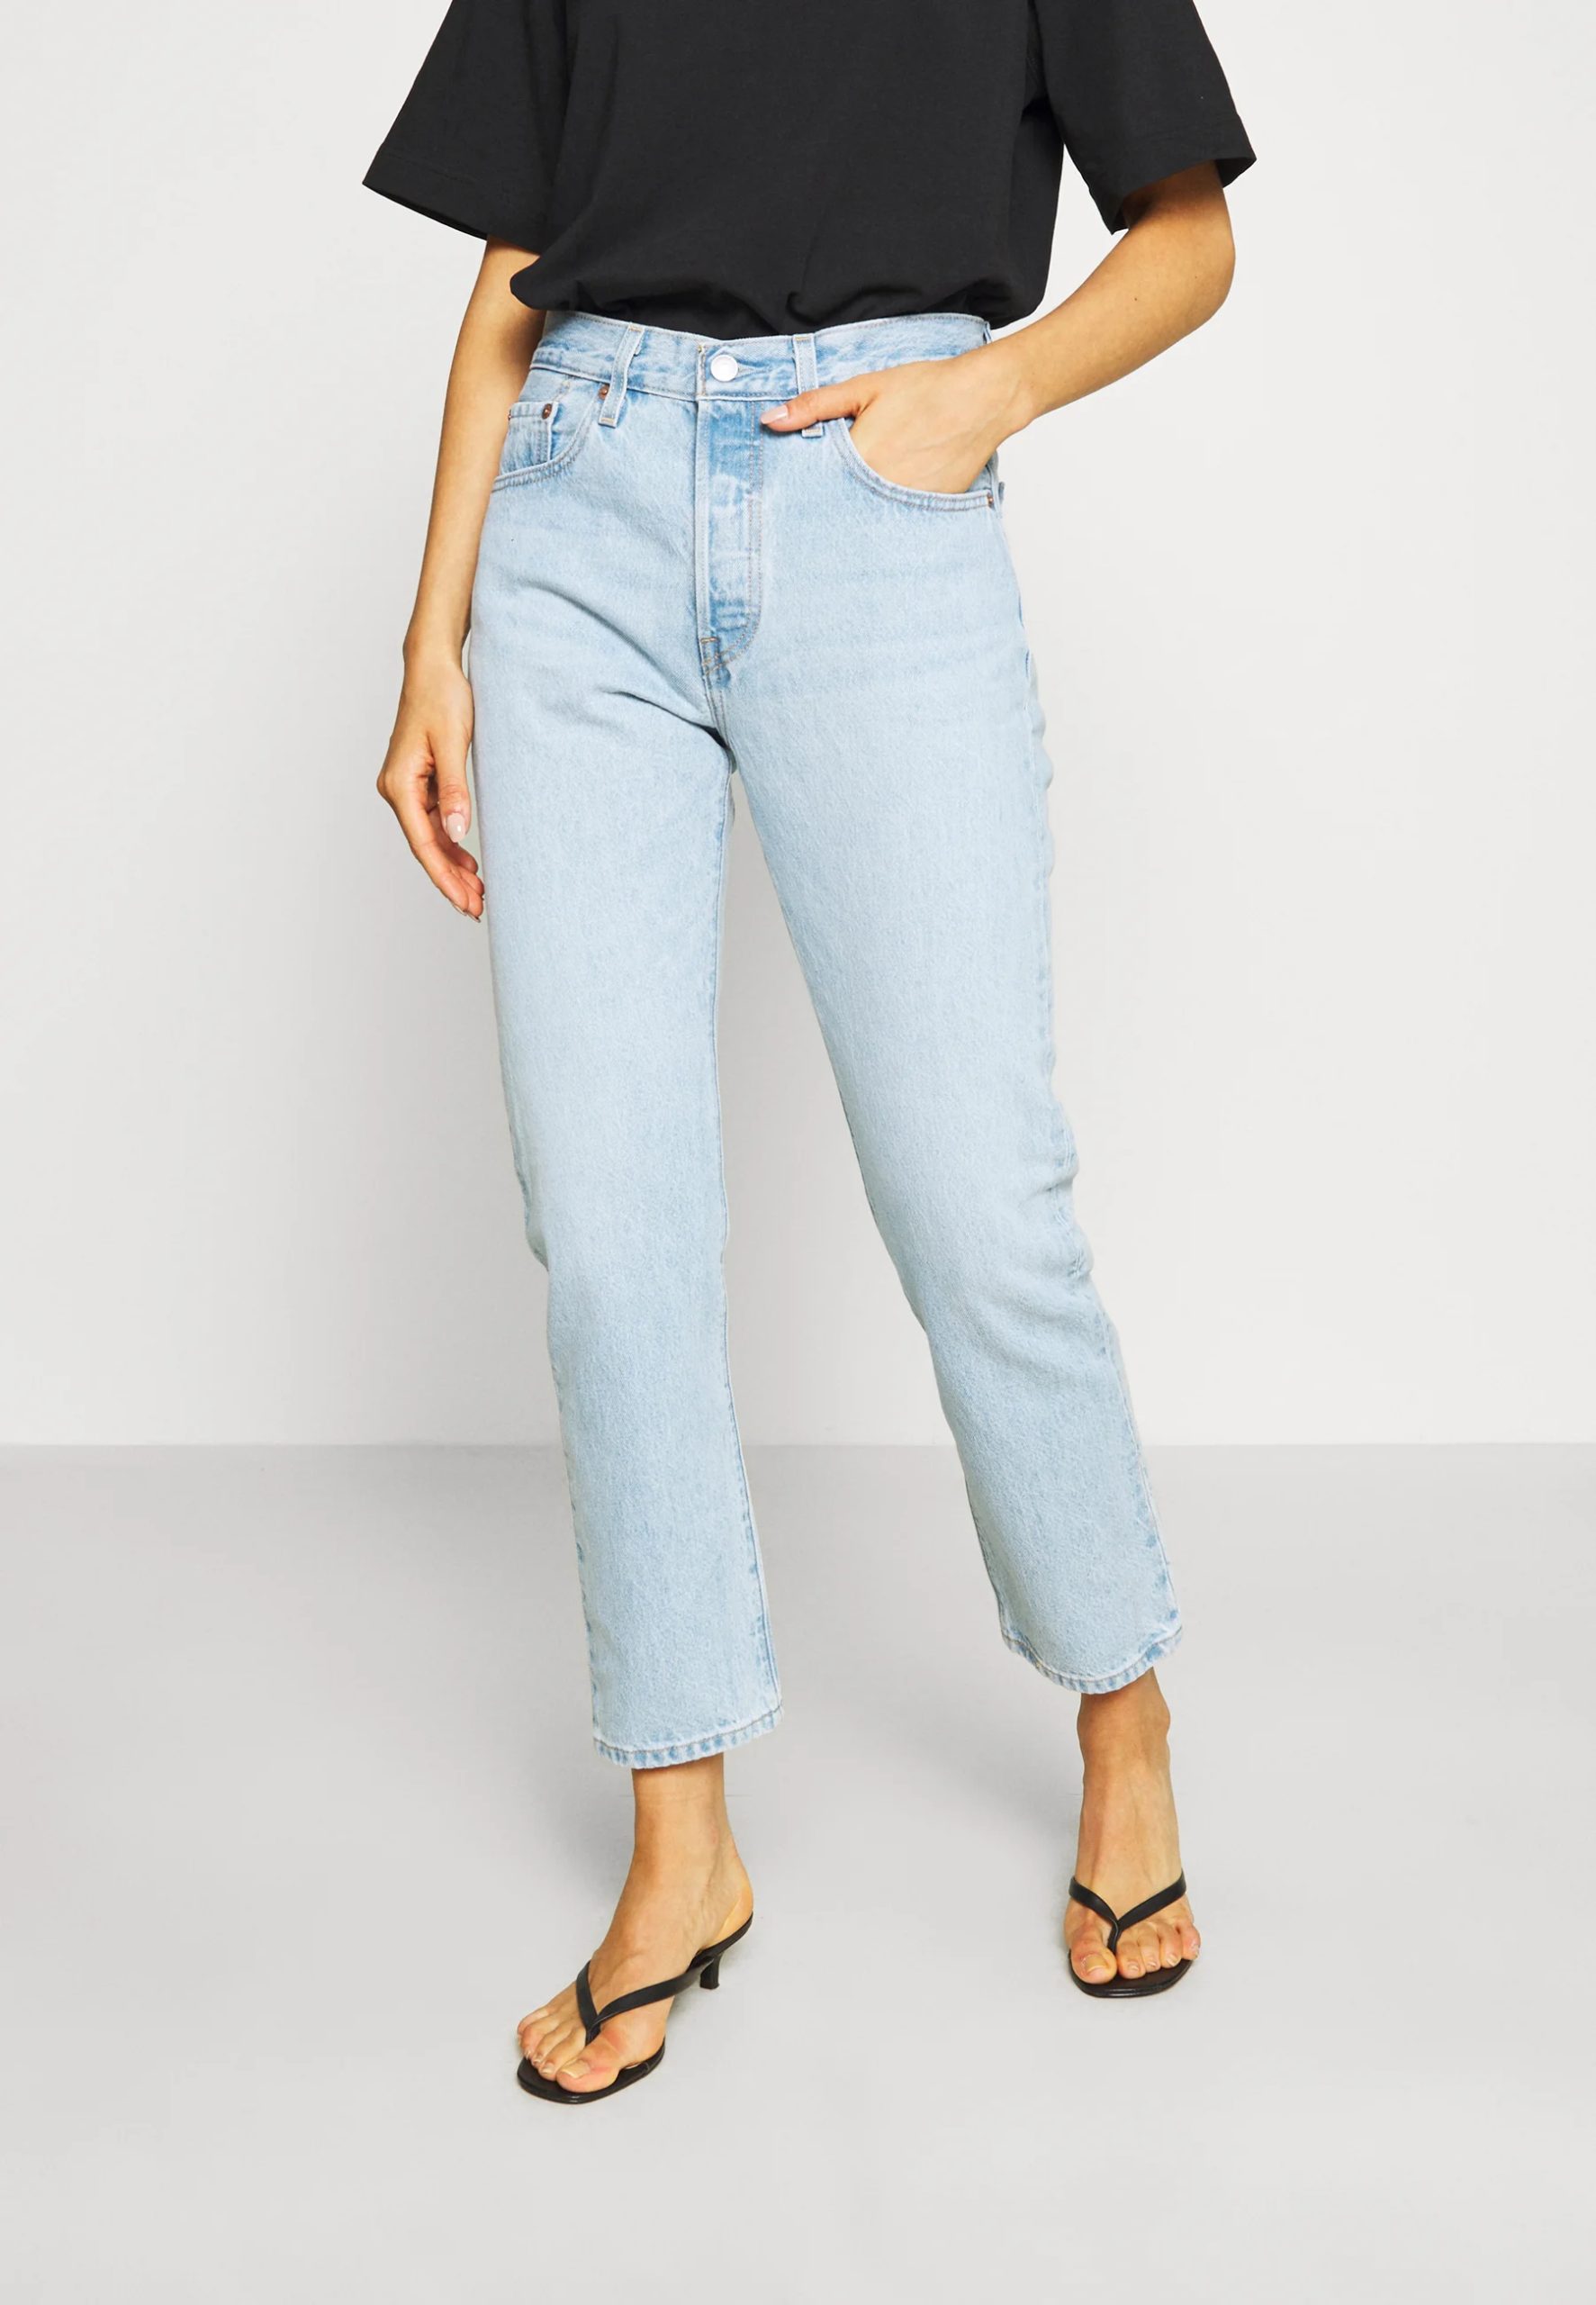 Levi's cropped jeans have become a popular fashion staple, offering a unique style that combines the classic denim look